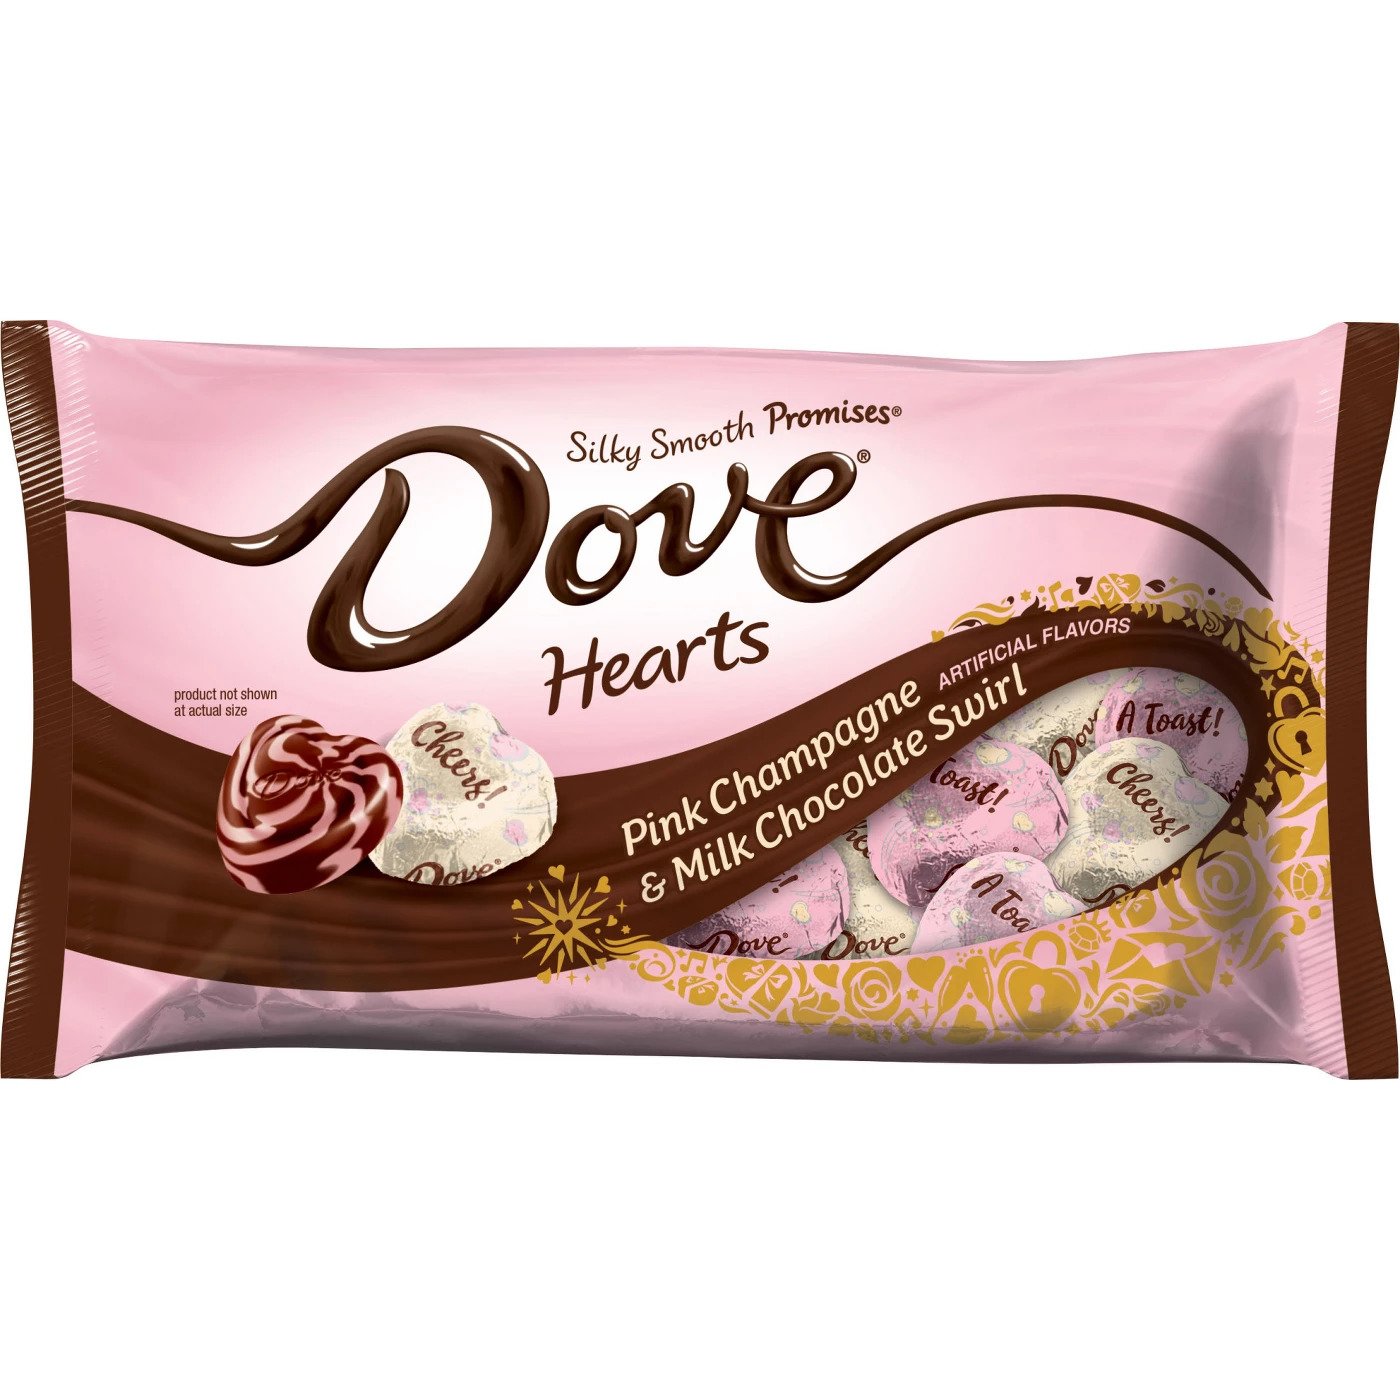 https://food.fnr.sndimg.com/content/dam/images/food/unsized/2019/1/31/rx_target-dove-champagne-chocolate_v.jpg